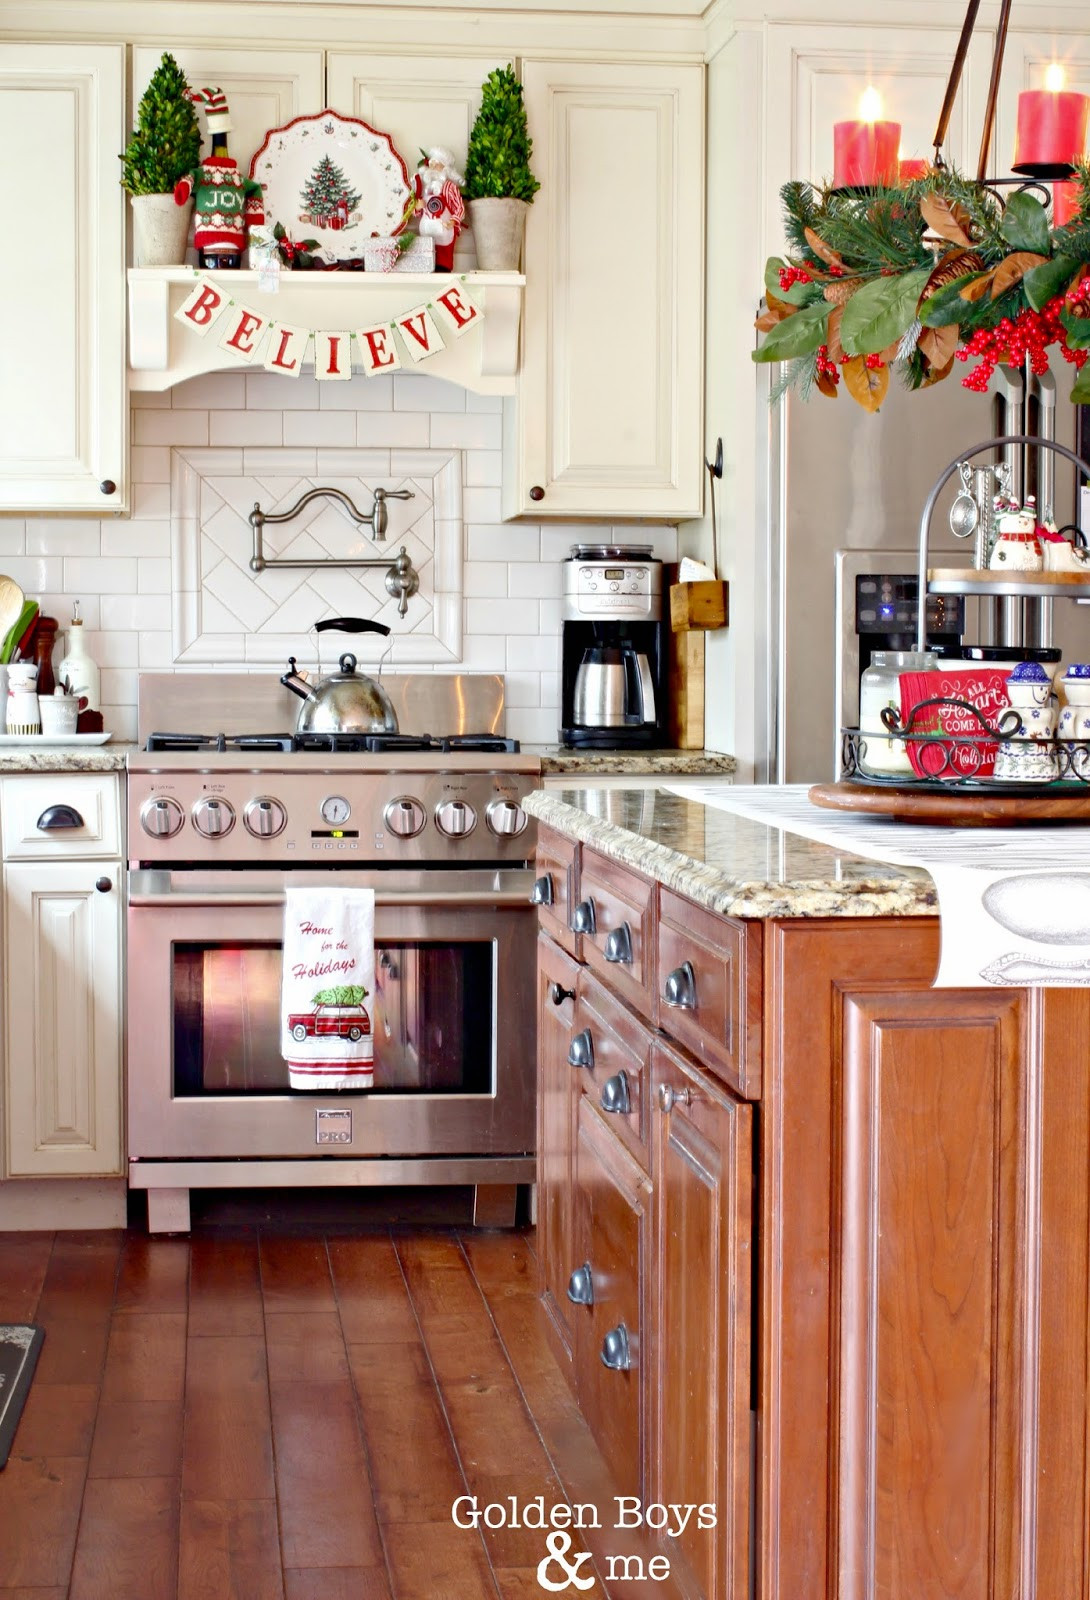 Kitchen Cabinet Christmas Decorating Ideas
 Golden Boys and Me Holiday Home Tour 2014